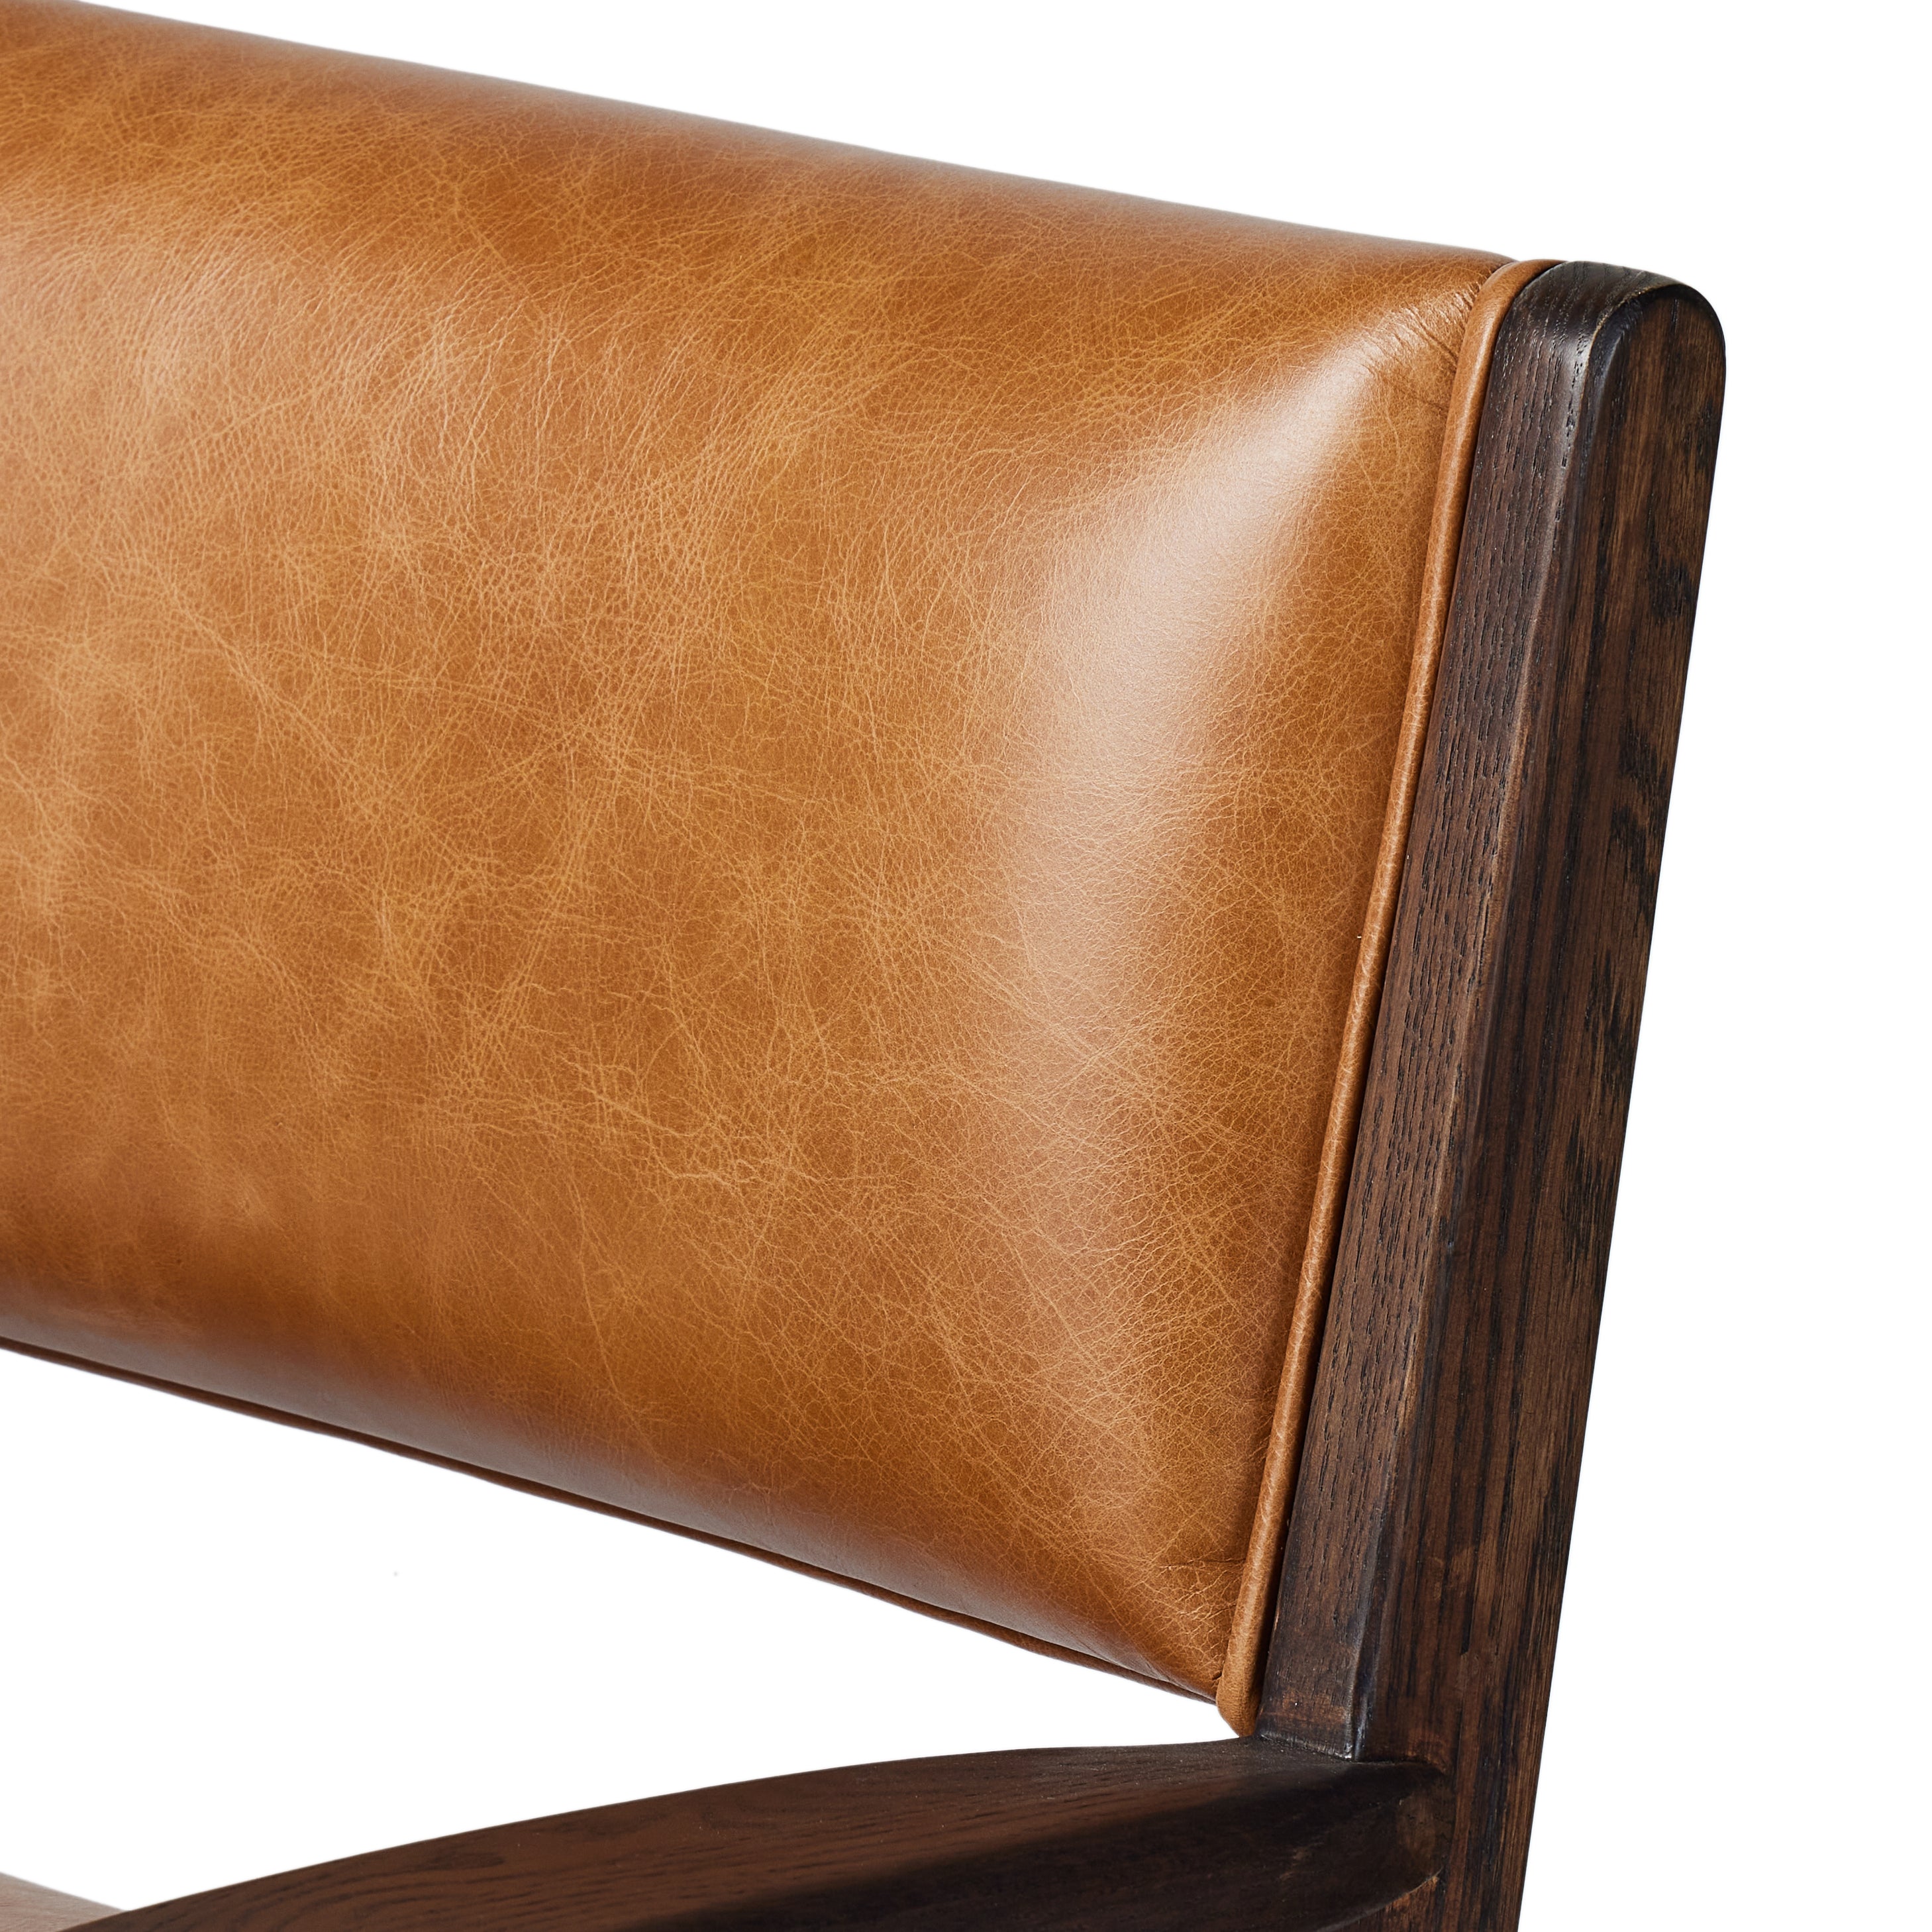 A modern take on the vintage school chair, upholstered in butterscotch top-grain leather exclusive to Four Hands. Amethyst Home provides interior design, new home construction design consulting, vintage area rugs, and lighting in the San Diego metro area.